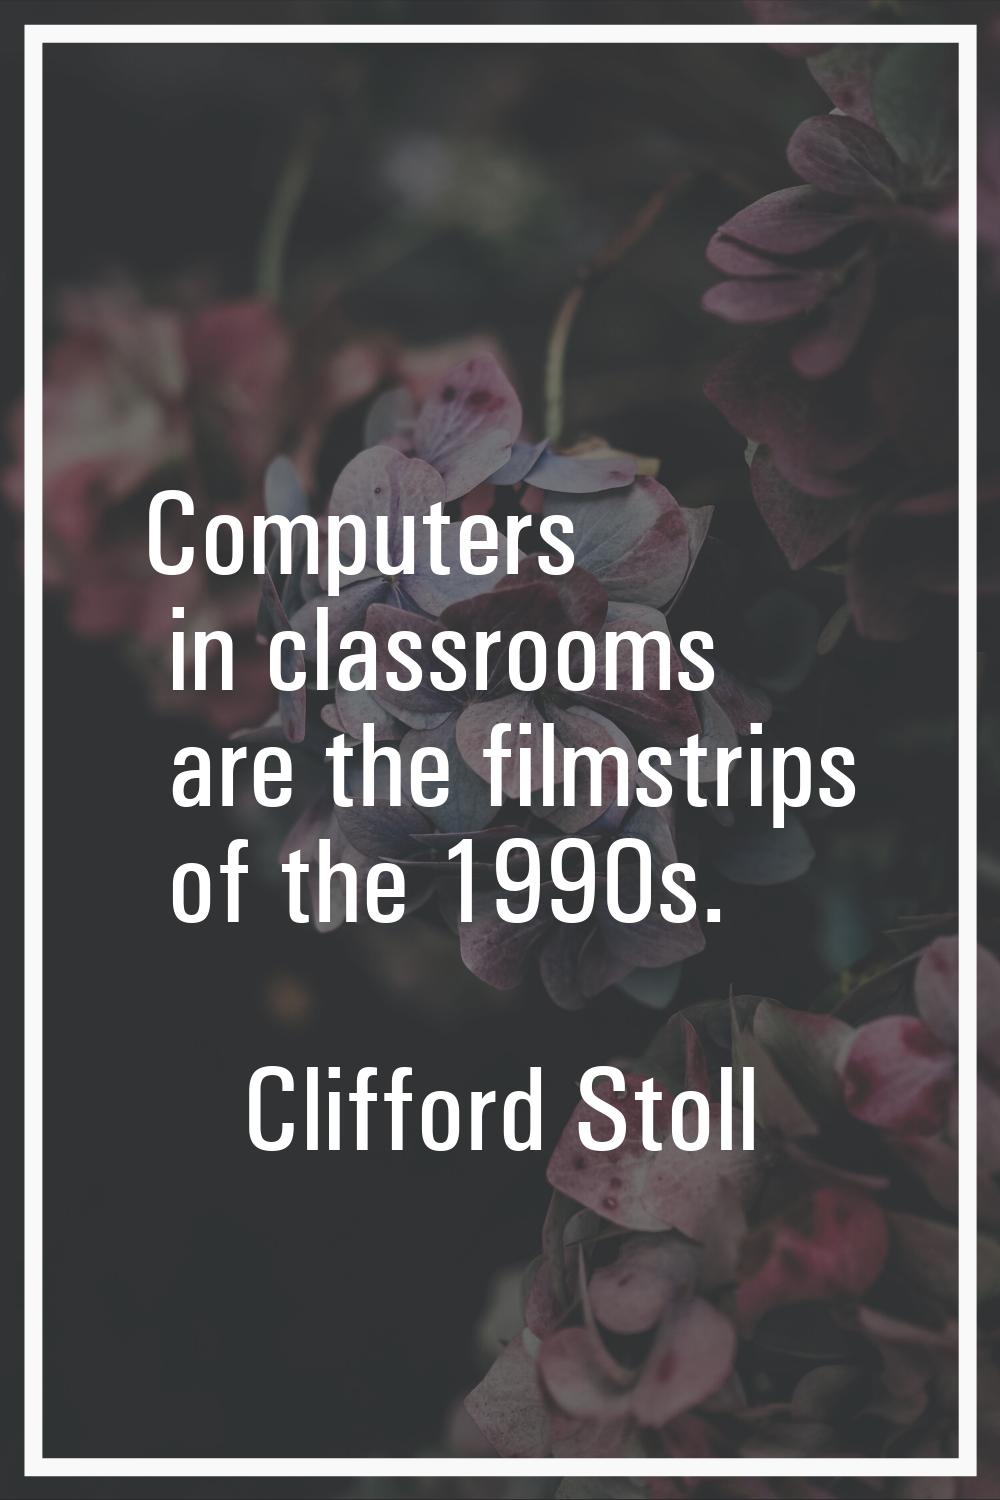 Computers in classrooms are the filmstrips of the 1990s.